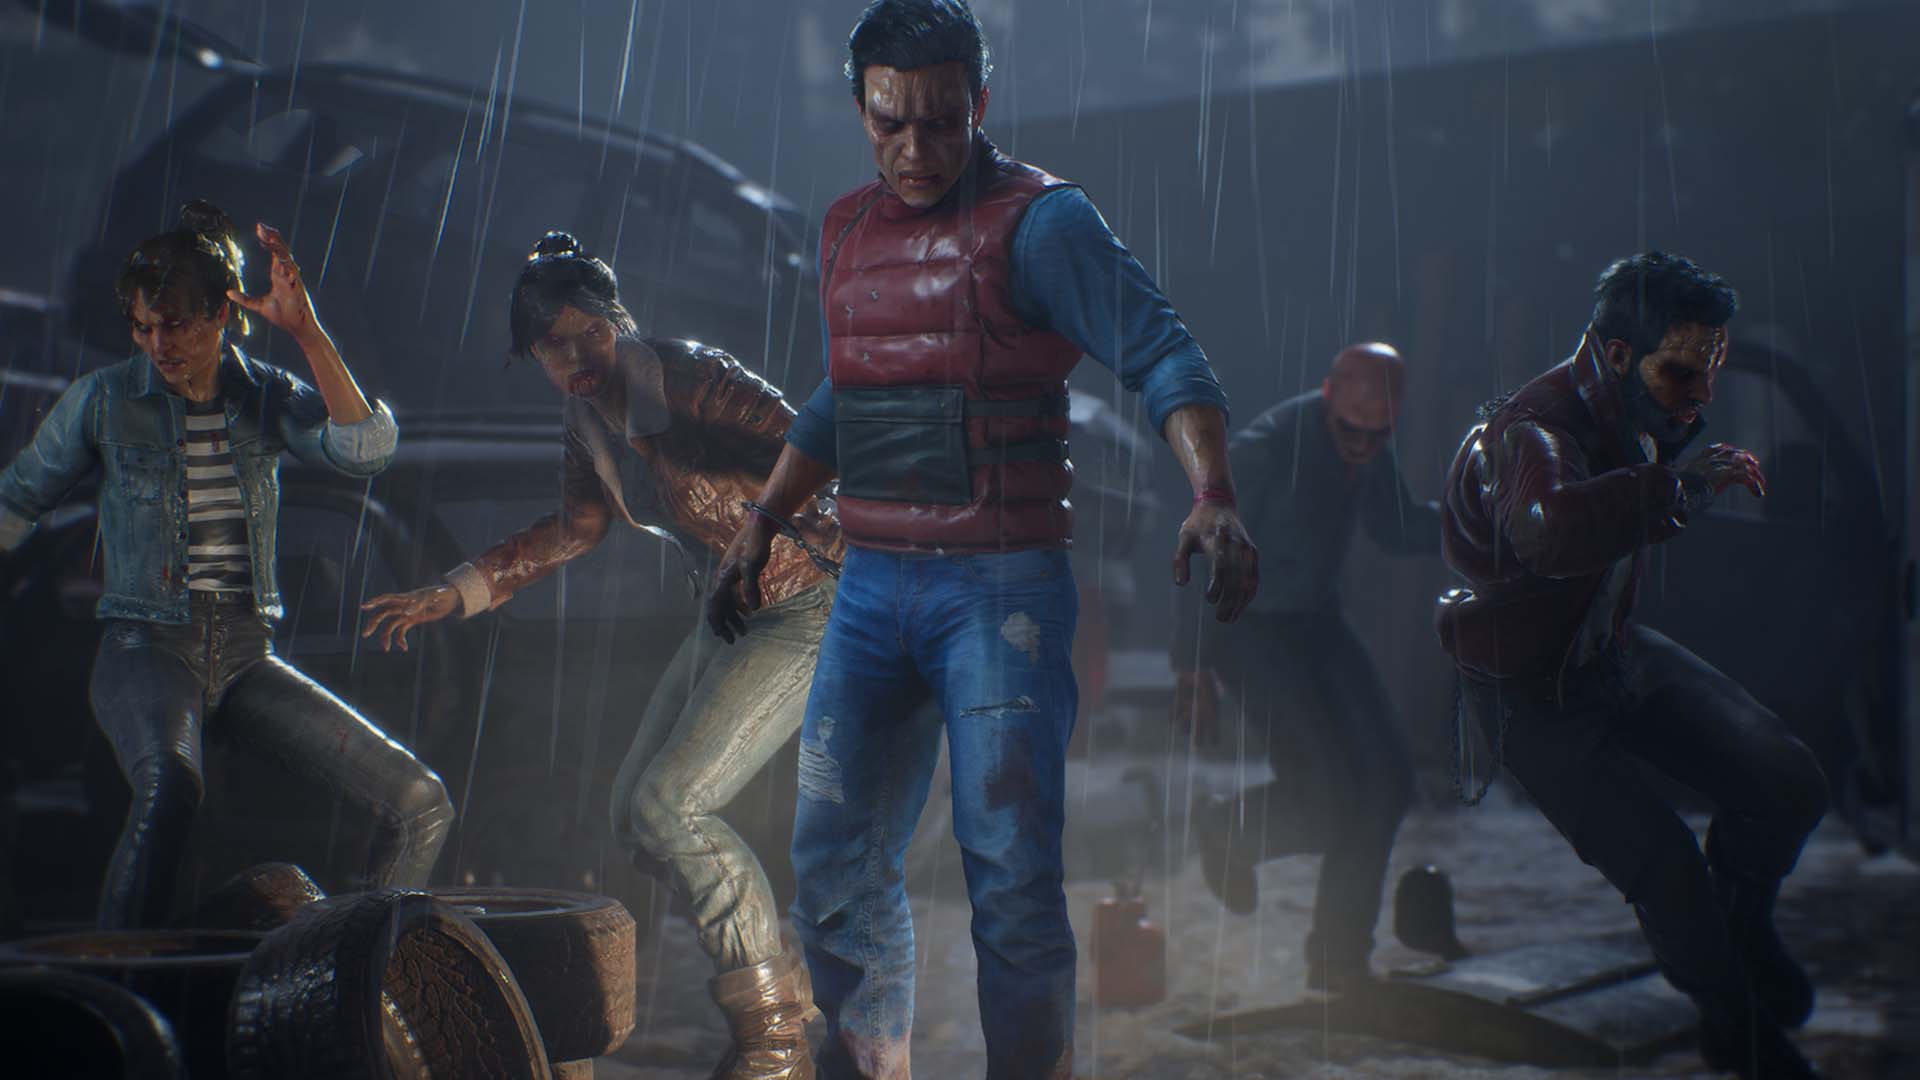 Evil Dead: The Game play as the demons first